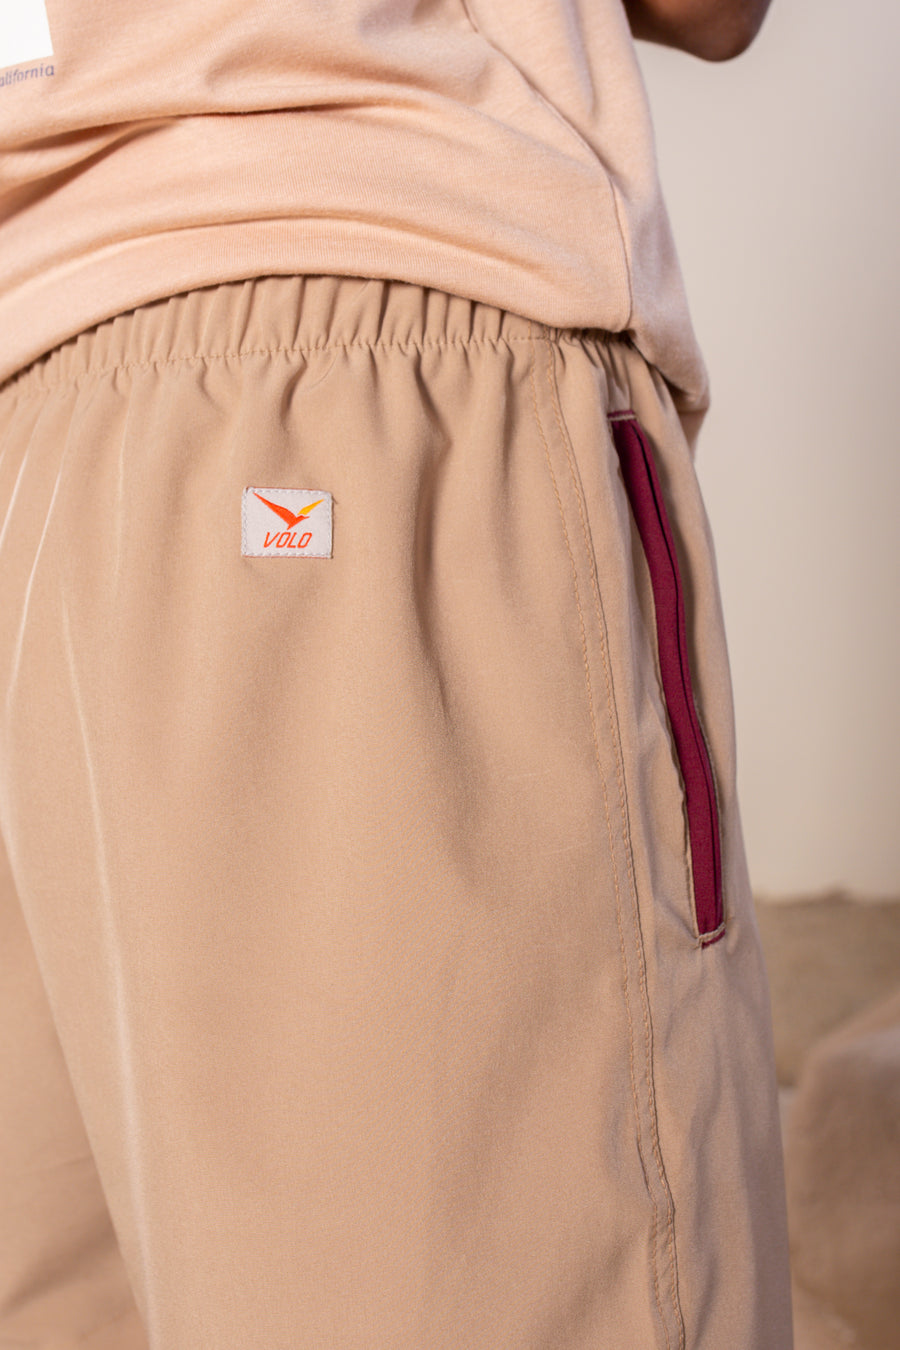 Men's Flight Shorts in Tan | VOLO Apparel | Designed so you can feel fly and completely secure, the Flight Shorts 2.0 are made with an ultralight micro stretch fabric that is quick drying and comes with a three zipper pocket design. The smart pocket tech makes it so your stuff won’t bounce when you do. Reinforced stitching so it can handle everything you will throw at it. The one short for your every adventure.